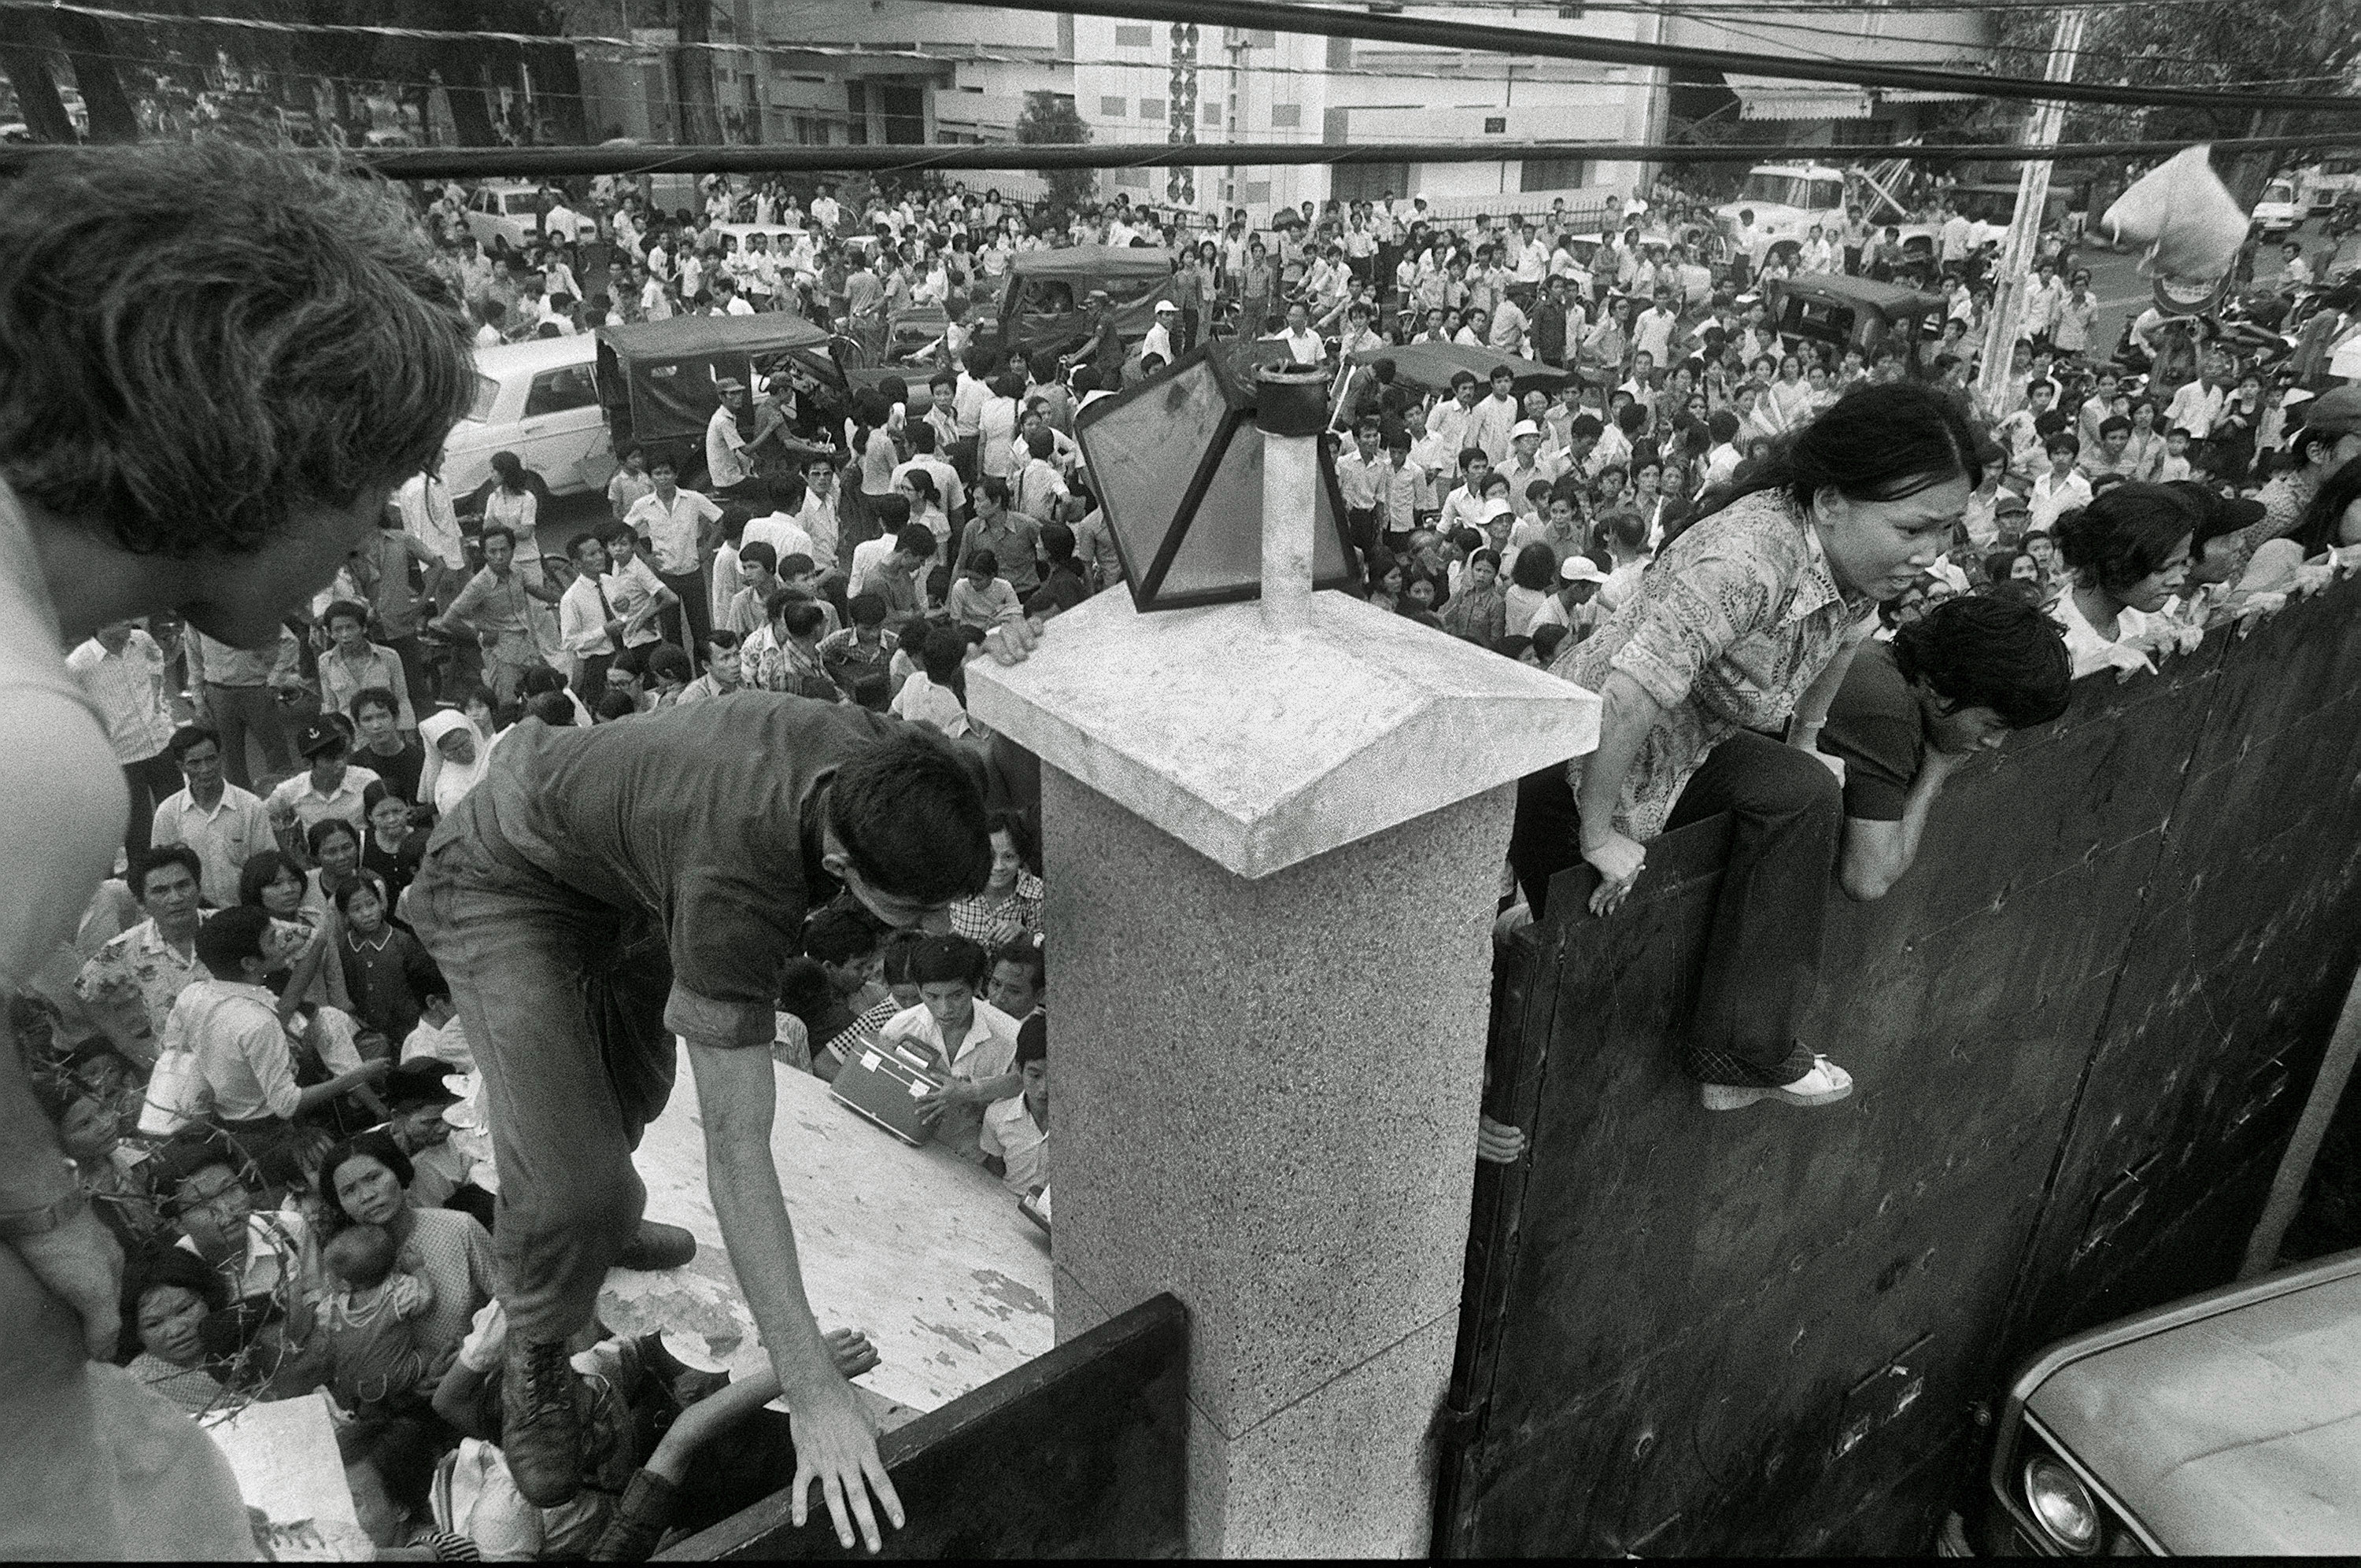 FILE - In this April 29, 1975 file photo, South Vietnamese civilians scale the 14-foot wall of the U.S. embassy in Saigon, trying to reach evacuation helicopters as the last Americans depart from Vietnam. (AP Photo/File)